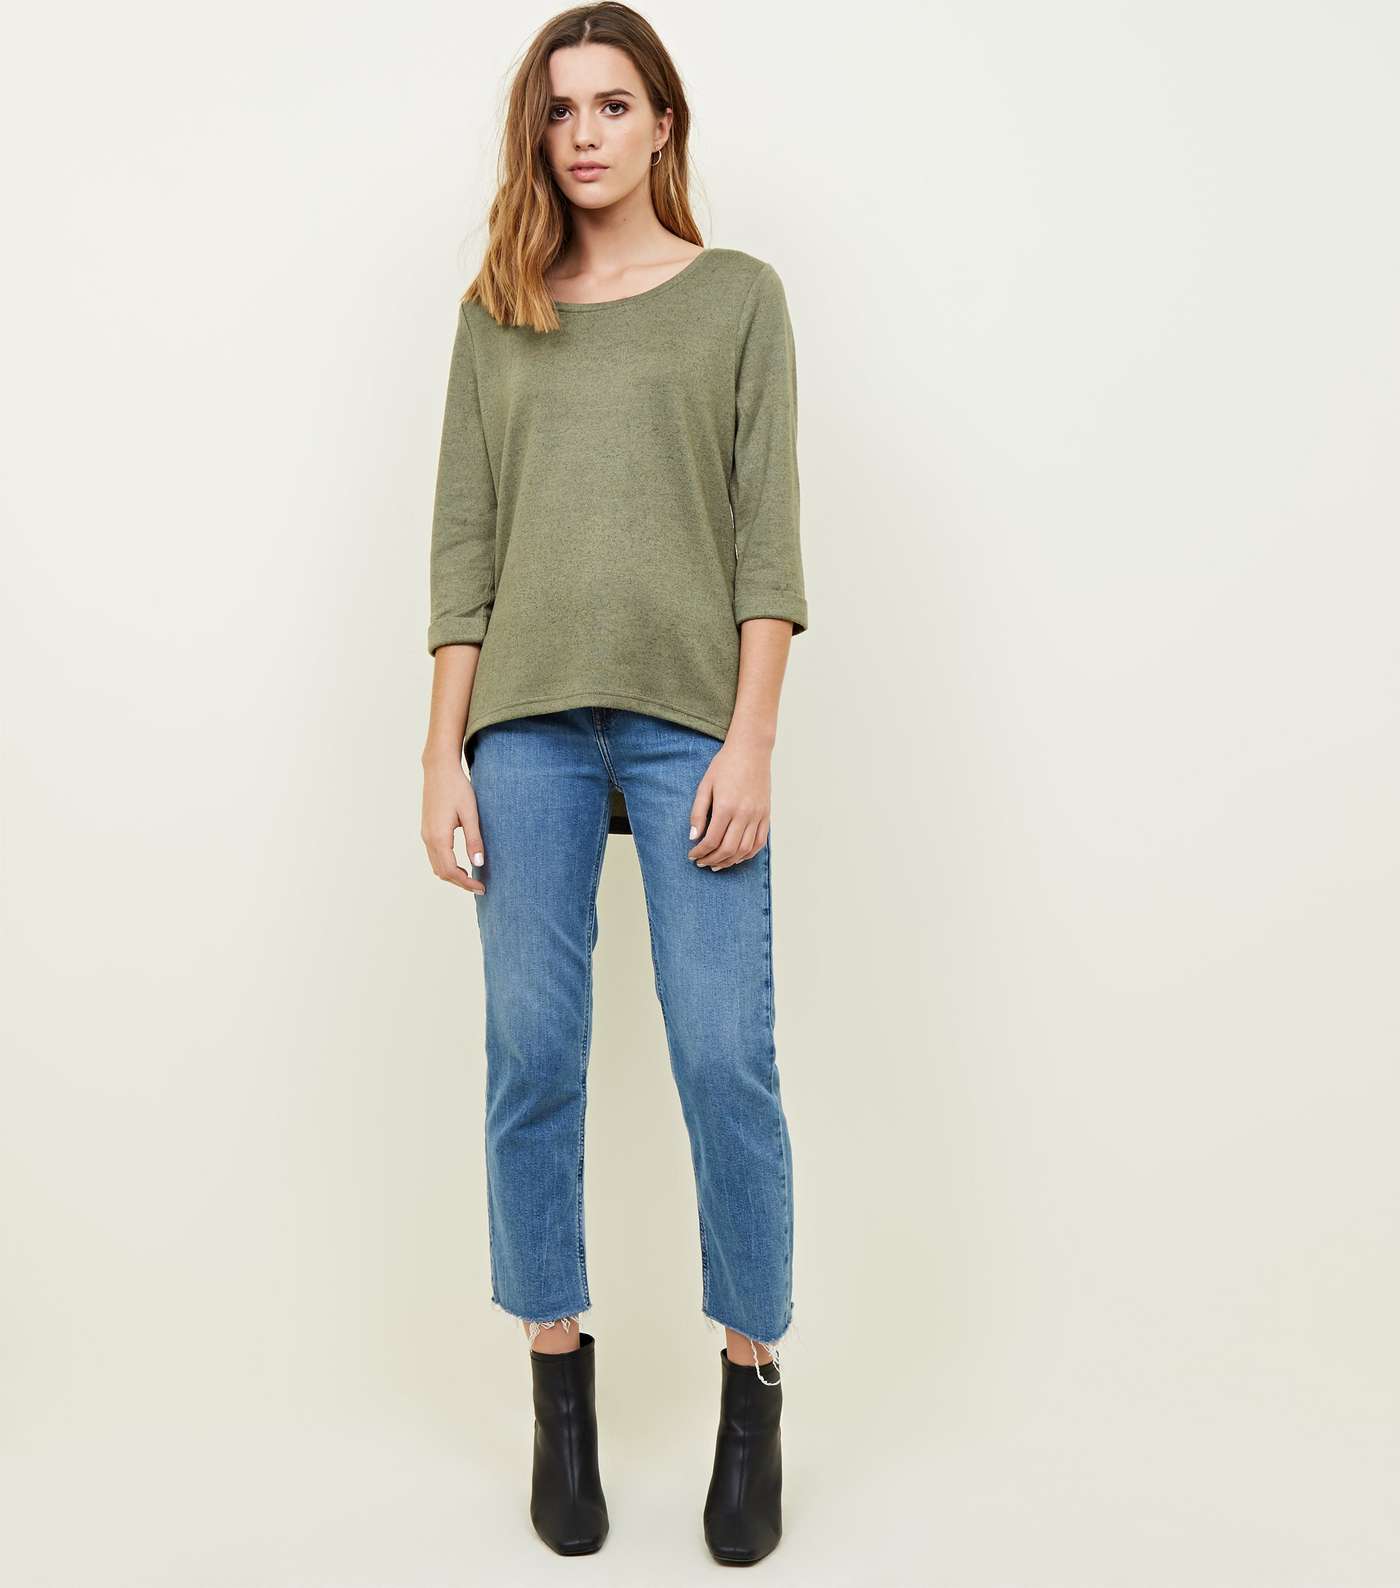 Olive Green 3/4 Sleeve Fine Knit Top Image 2